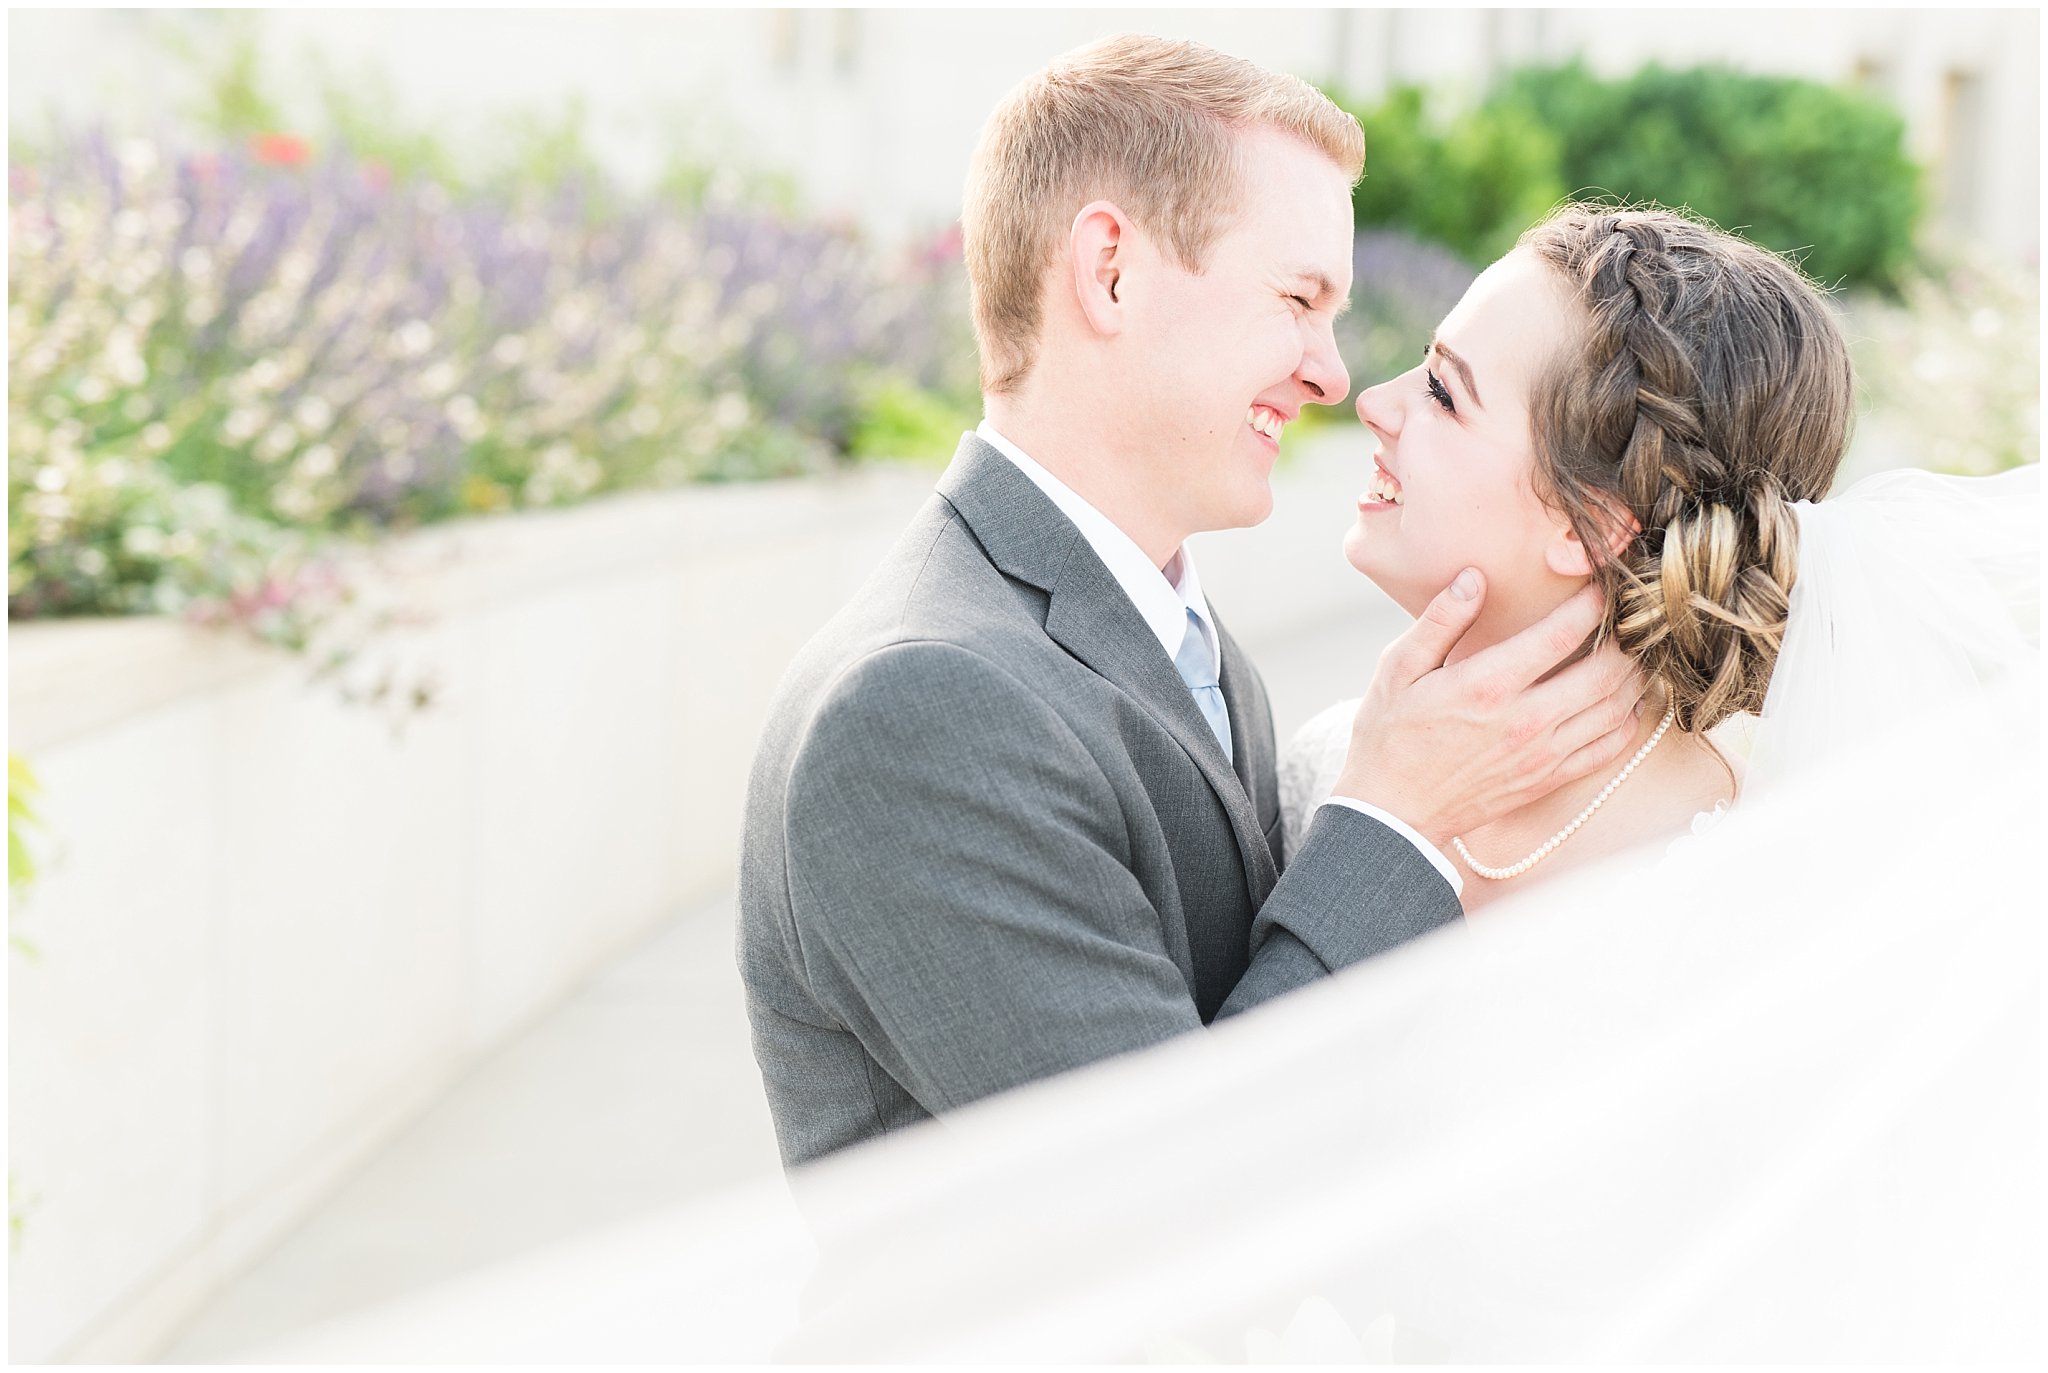 Bride and groom portraits with bride in elegant lace dress and veil, groom in grey suit and light blue tie | Ogden Temple Summer Formal Session | Ogden Temple Wedding | Jessie and Dallin Photography